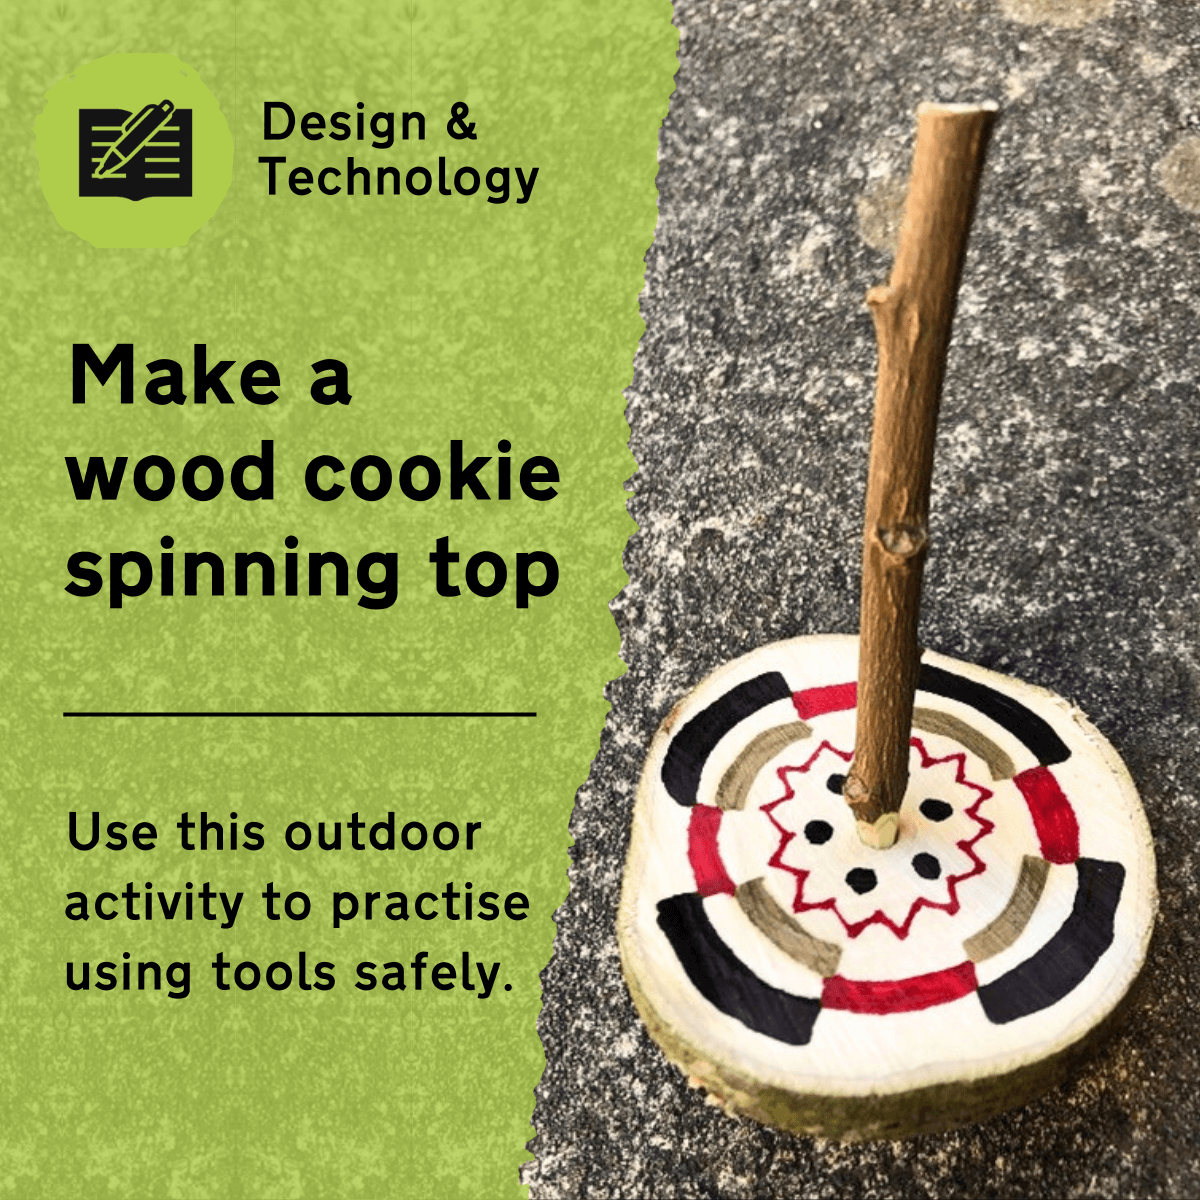 Use this design and technology activity to practise using tools safely to create a wooden spinning top. Ideal for Forest School, this outdoor lesson idea supports creativity while improving fine motor skills and confidence using tools.